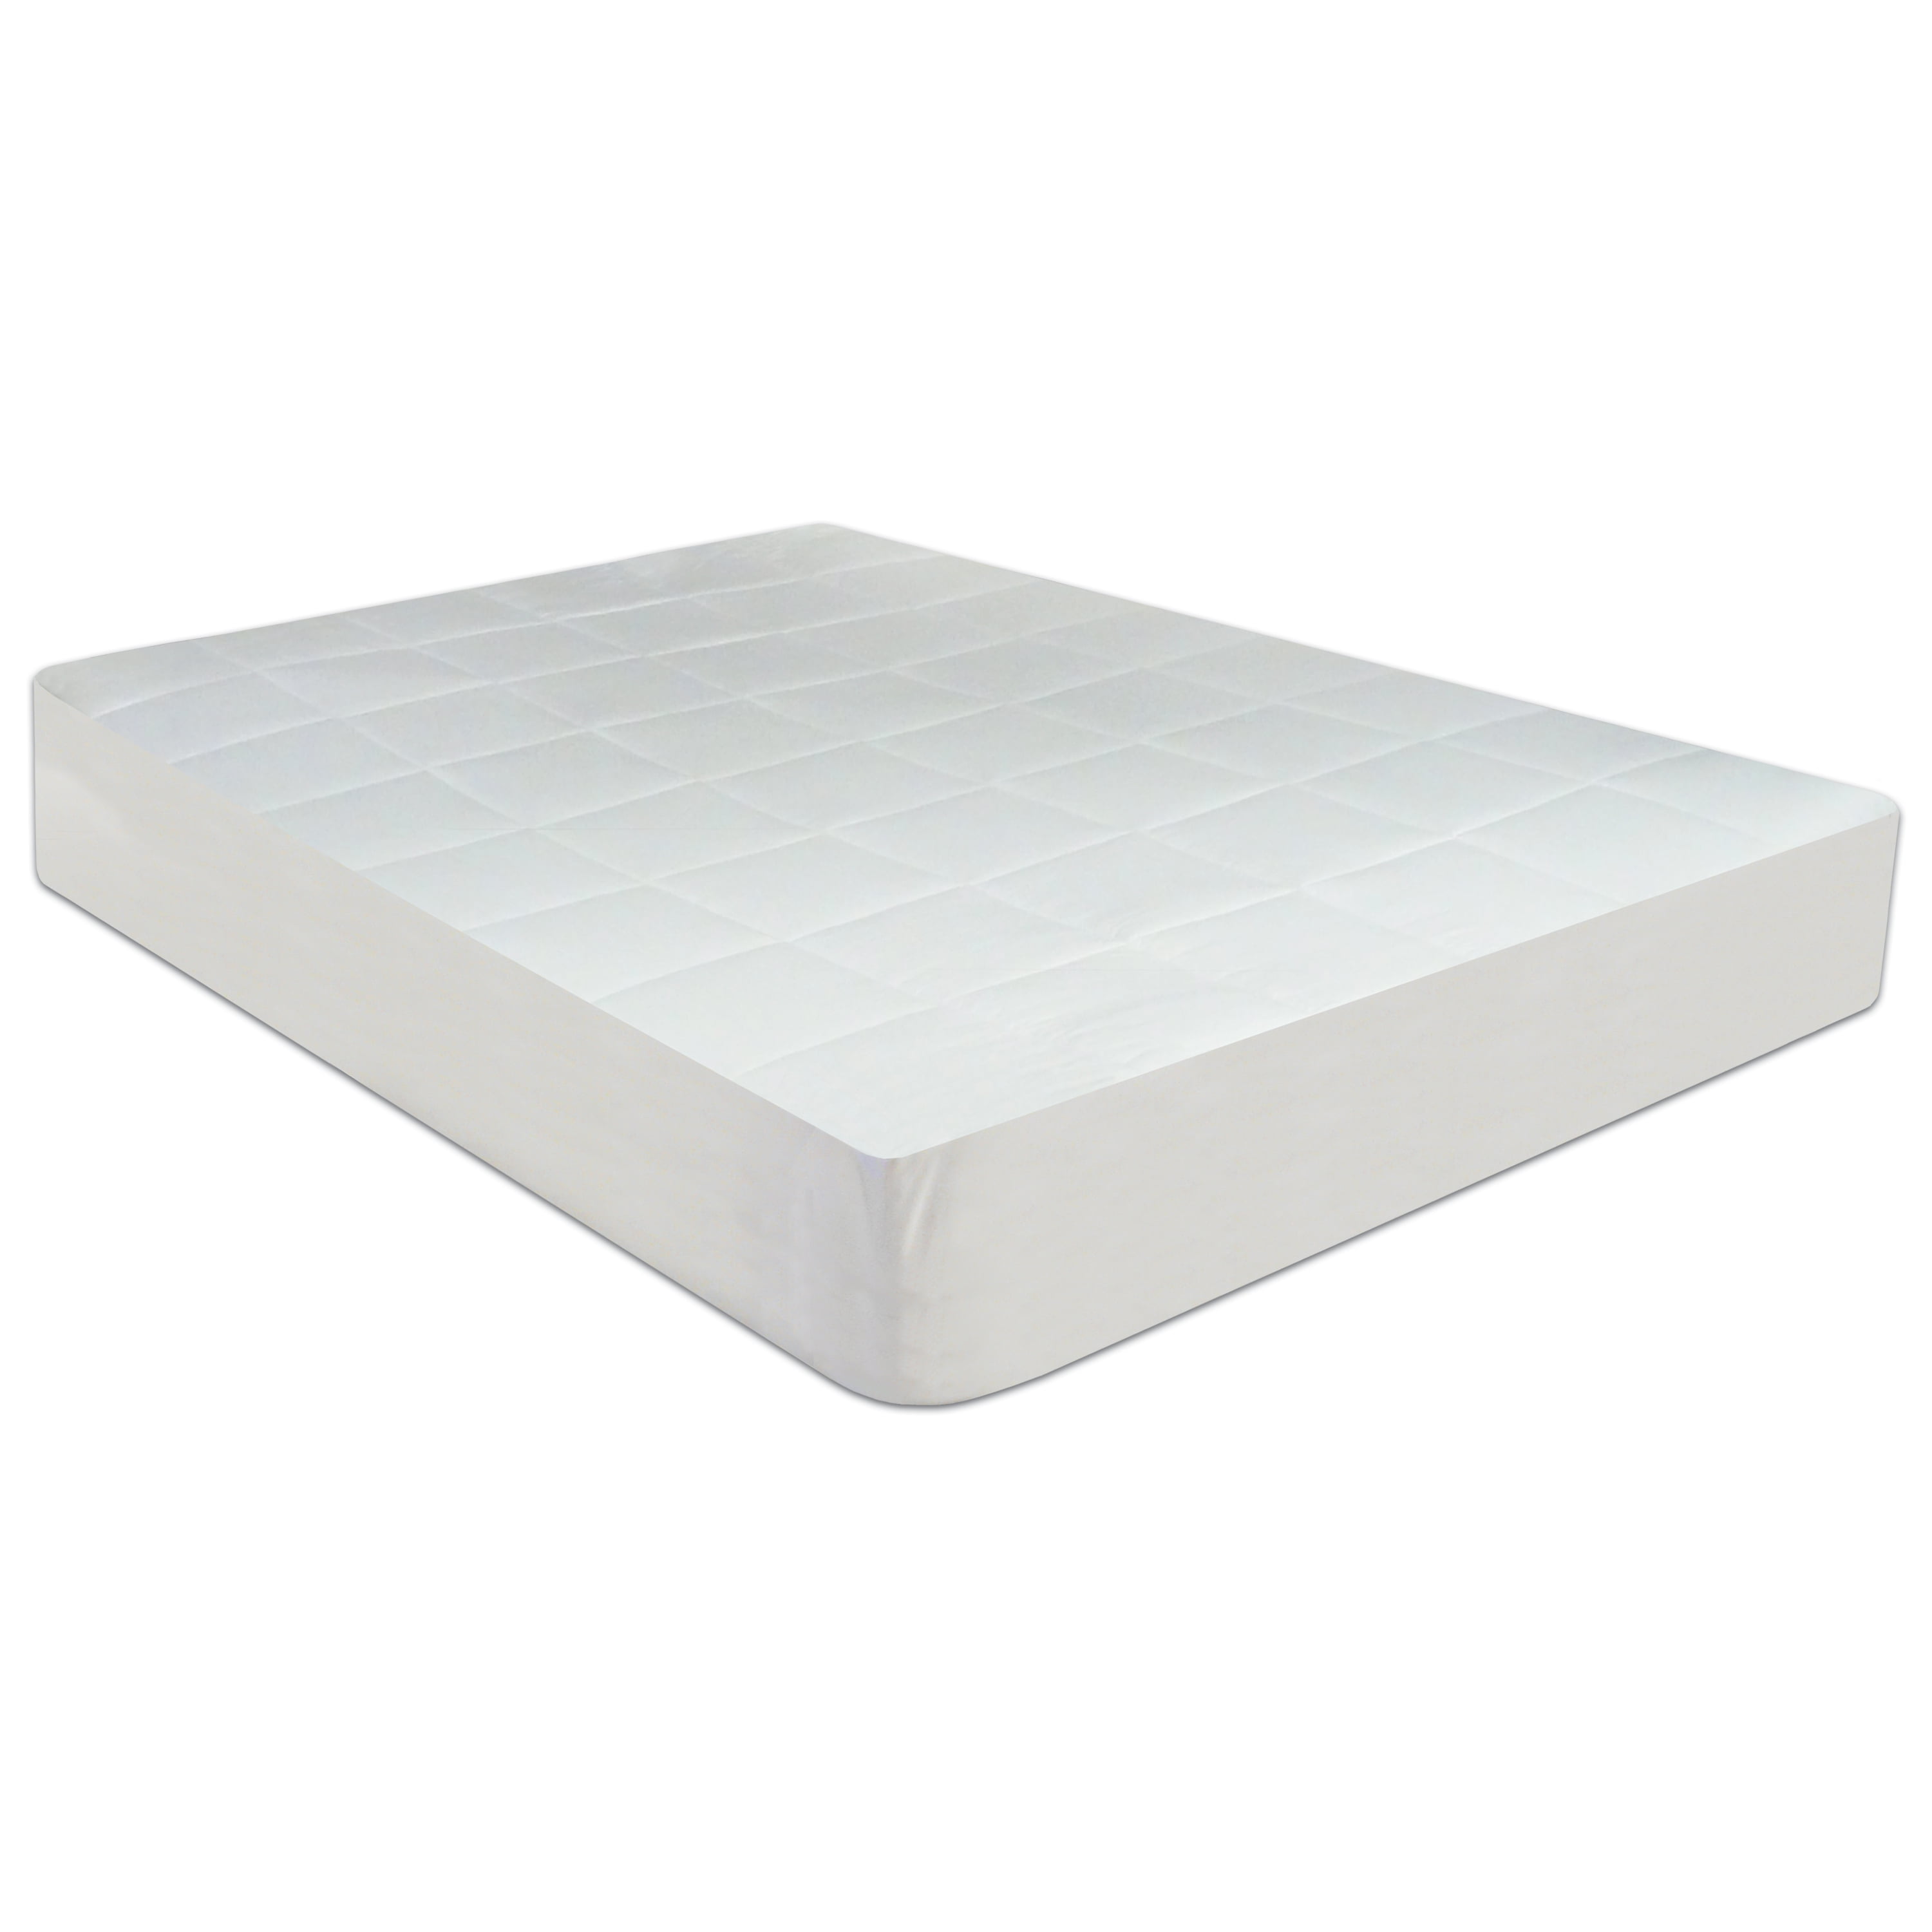 California Queen Quilted Fitted Ultima Waterbed Mattress Pad 